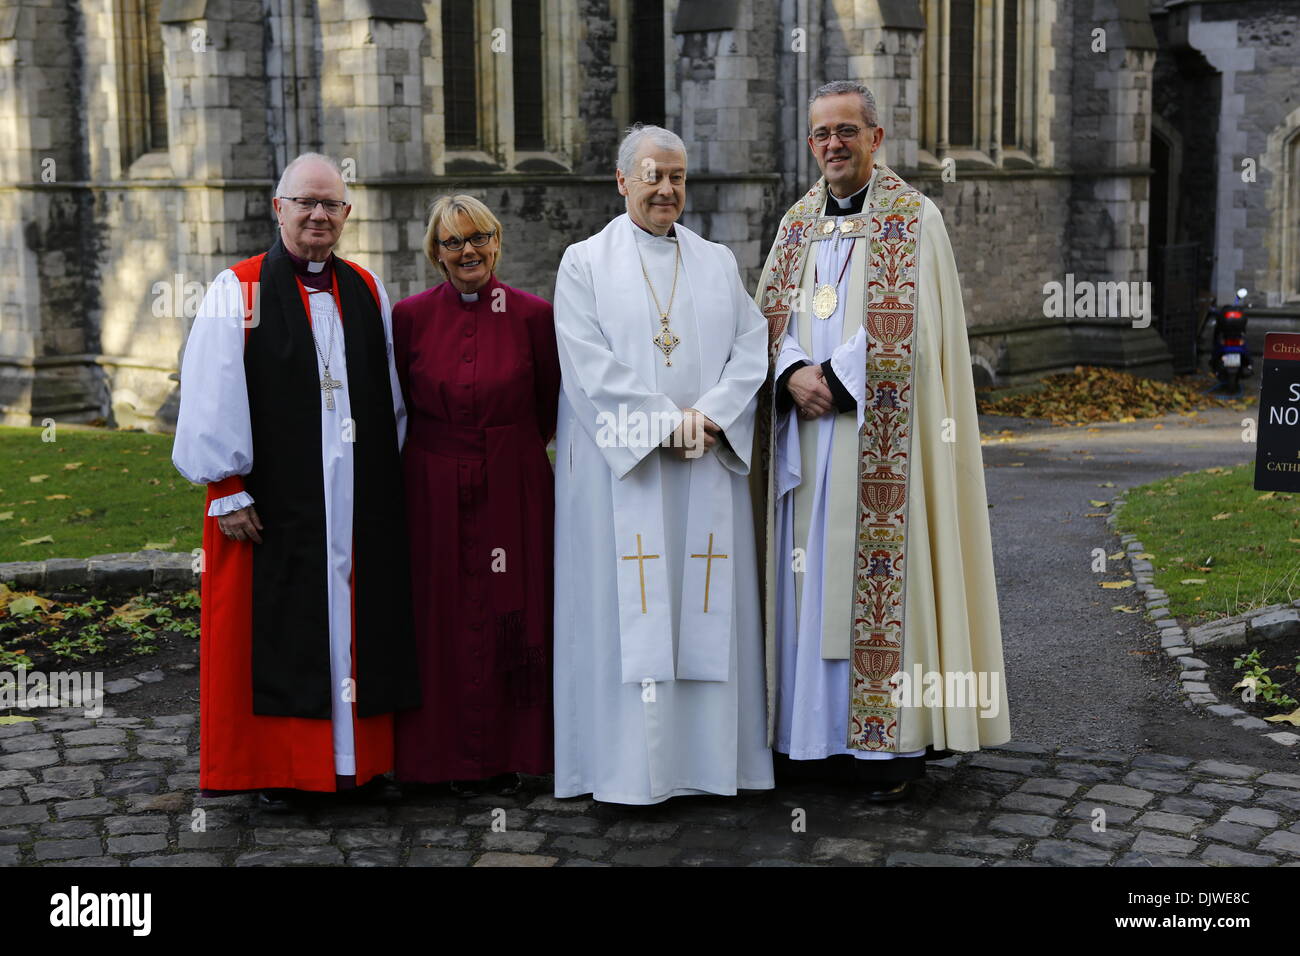 Dublin, Ireland. 30th November 2013. The bishop-elect the Revd Pat Storey (2 L) is pictured with the Archbishop of Armagh, the Most Revd Richard Clarke (L), the Archbishop of Dublin, the Most Revd Dr Michael Jackson (2 R) and The Very Reverend Dermot Dunne (R), the Dean of Christ Church, before the service. The Most Revd Pat Storey has been consecrated as Church of Ireland Bishop of Meath and Kildare in Dublin's Christ Church Cathedral. She is the first female Bishop to be consecrated in any denomination in Ireland and the UK, 23 years after the Church of Ireland approved the ordination of wom Stock Photo